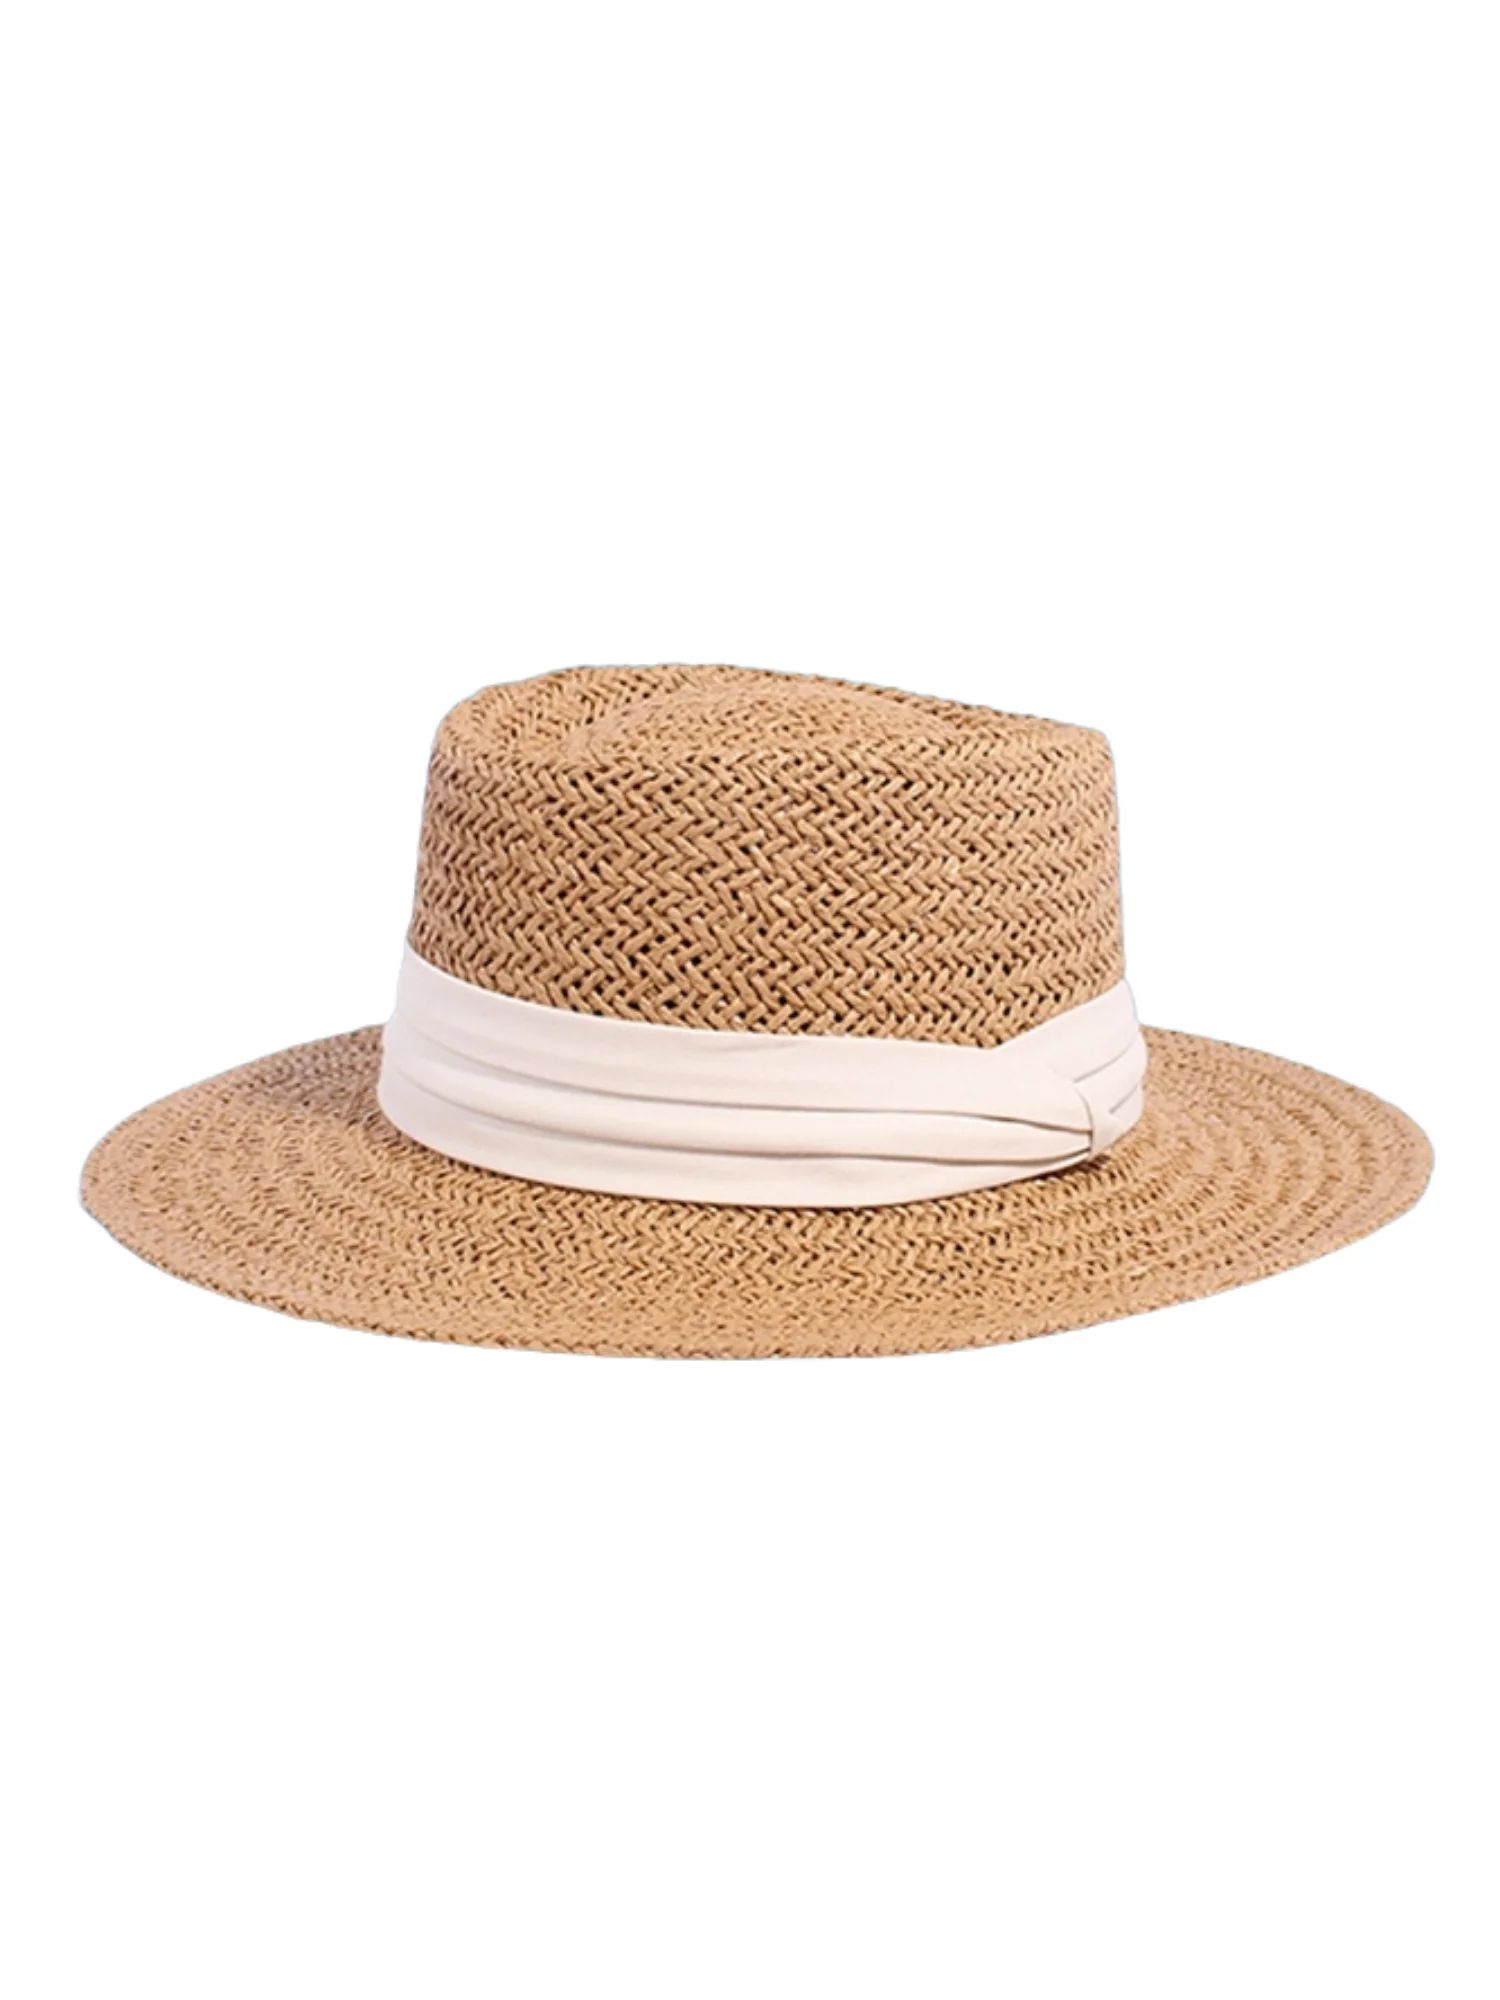 'Tessa' Straw Hat With Ribbon (3 Colors) | Goodnight Macaroon